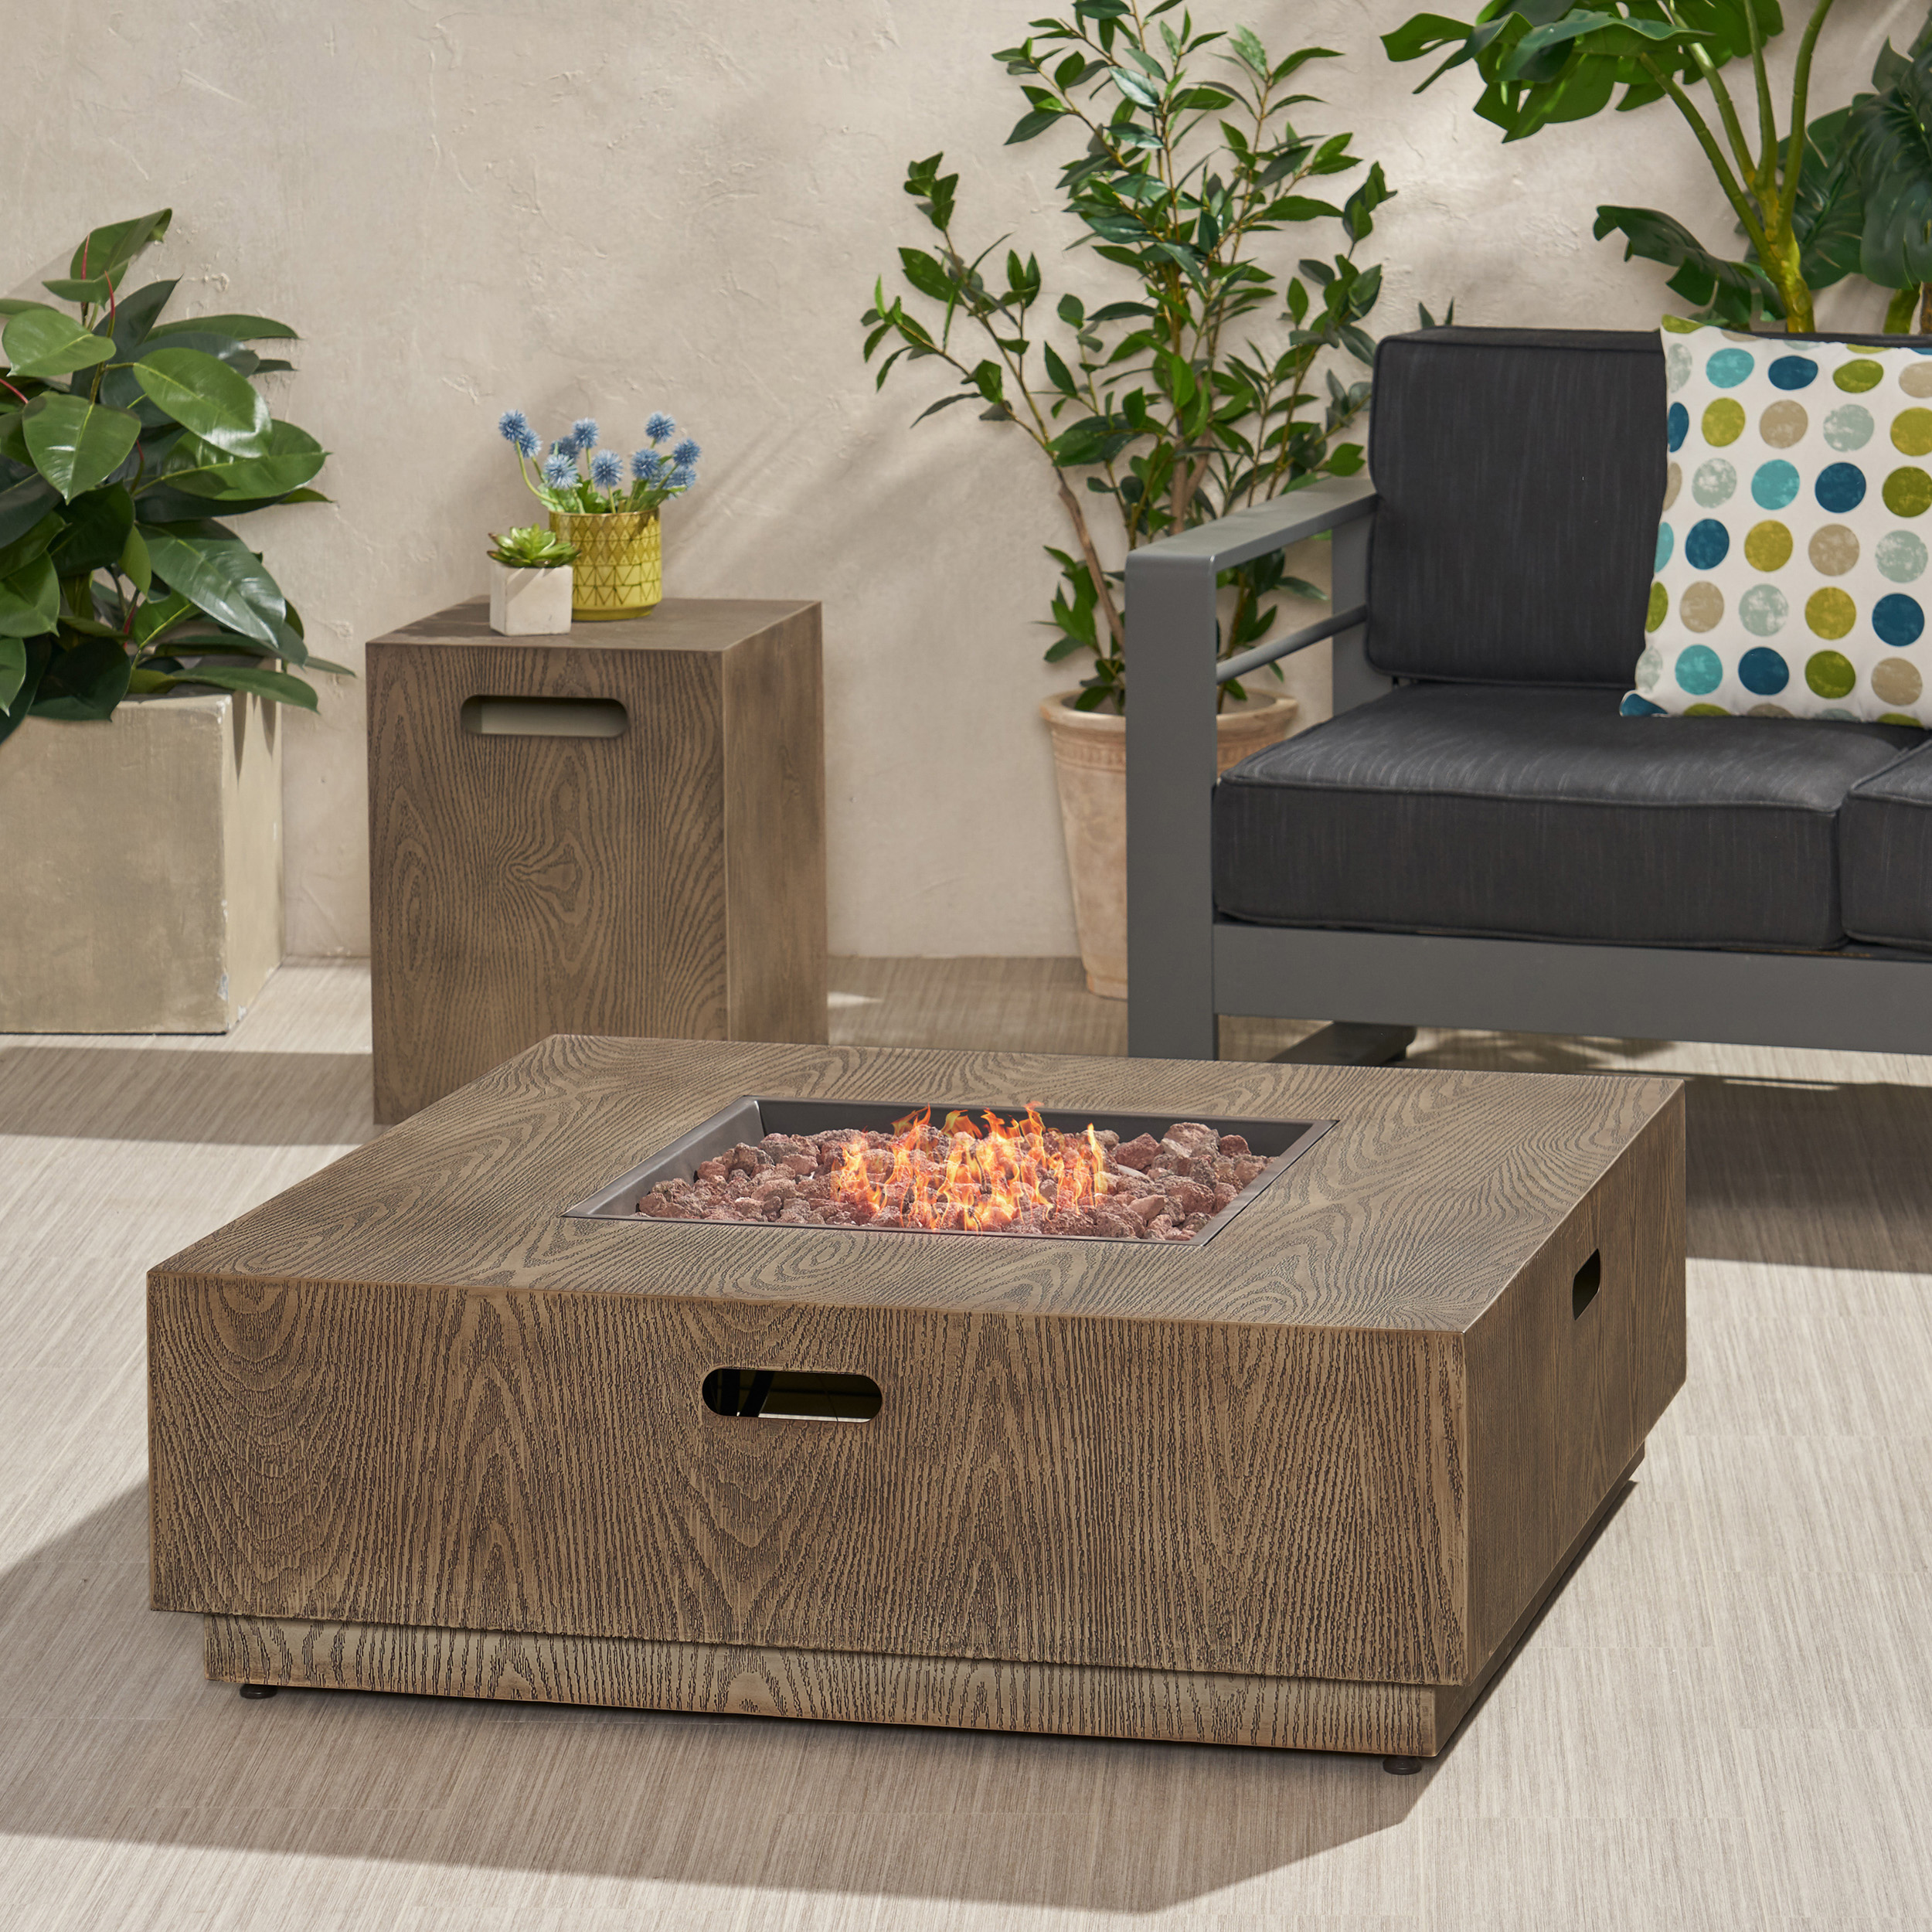 Noble House Wellington Square Outdoor Metal Fire Pit with Tank Holder in Brown - image 1 of 10